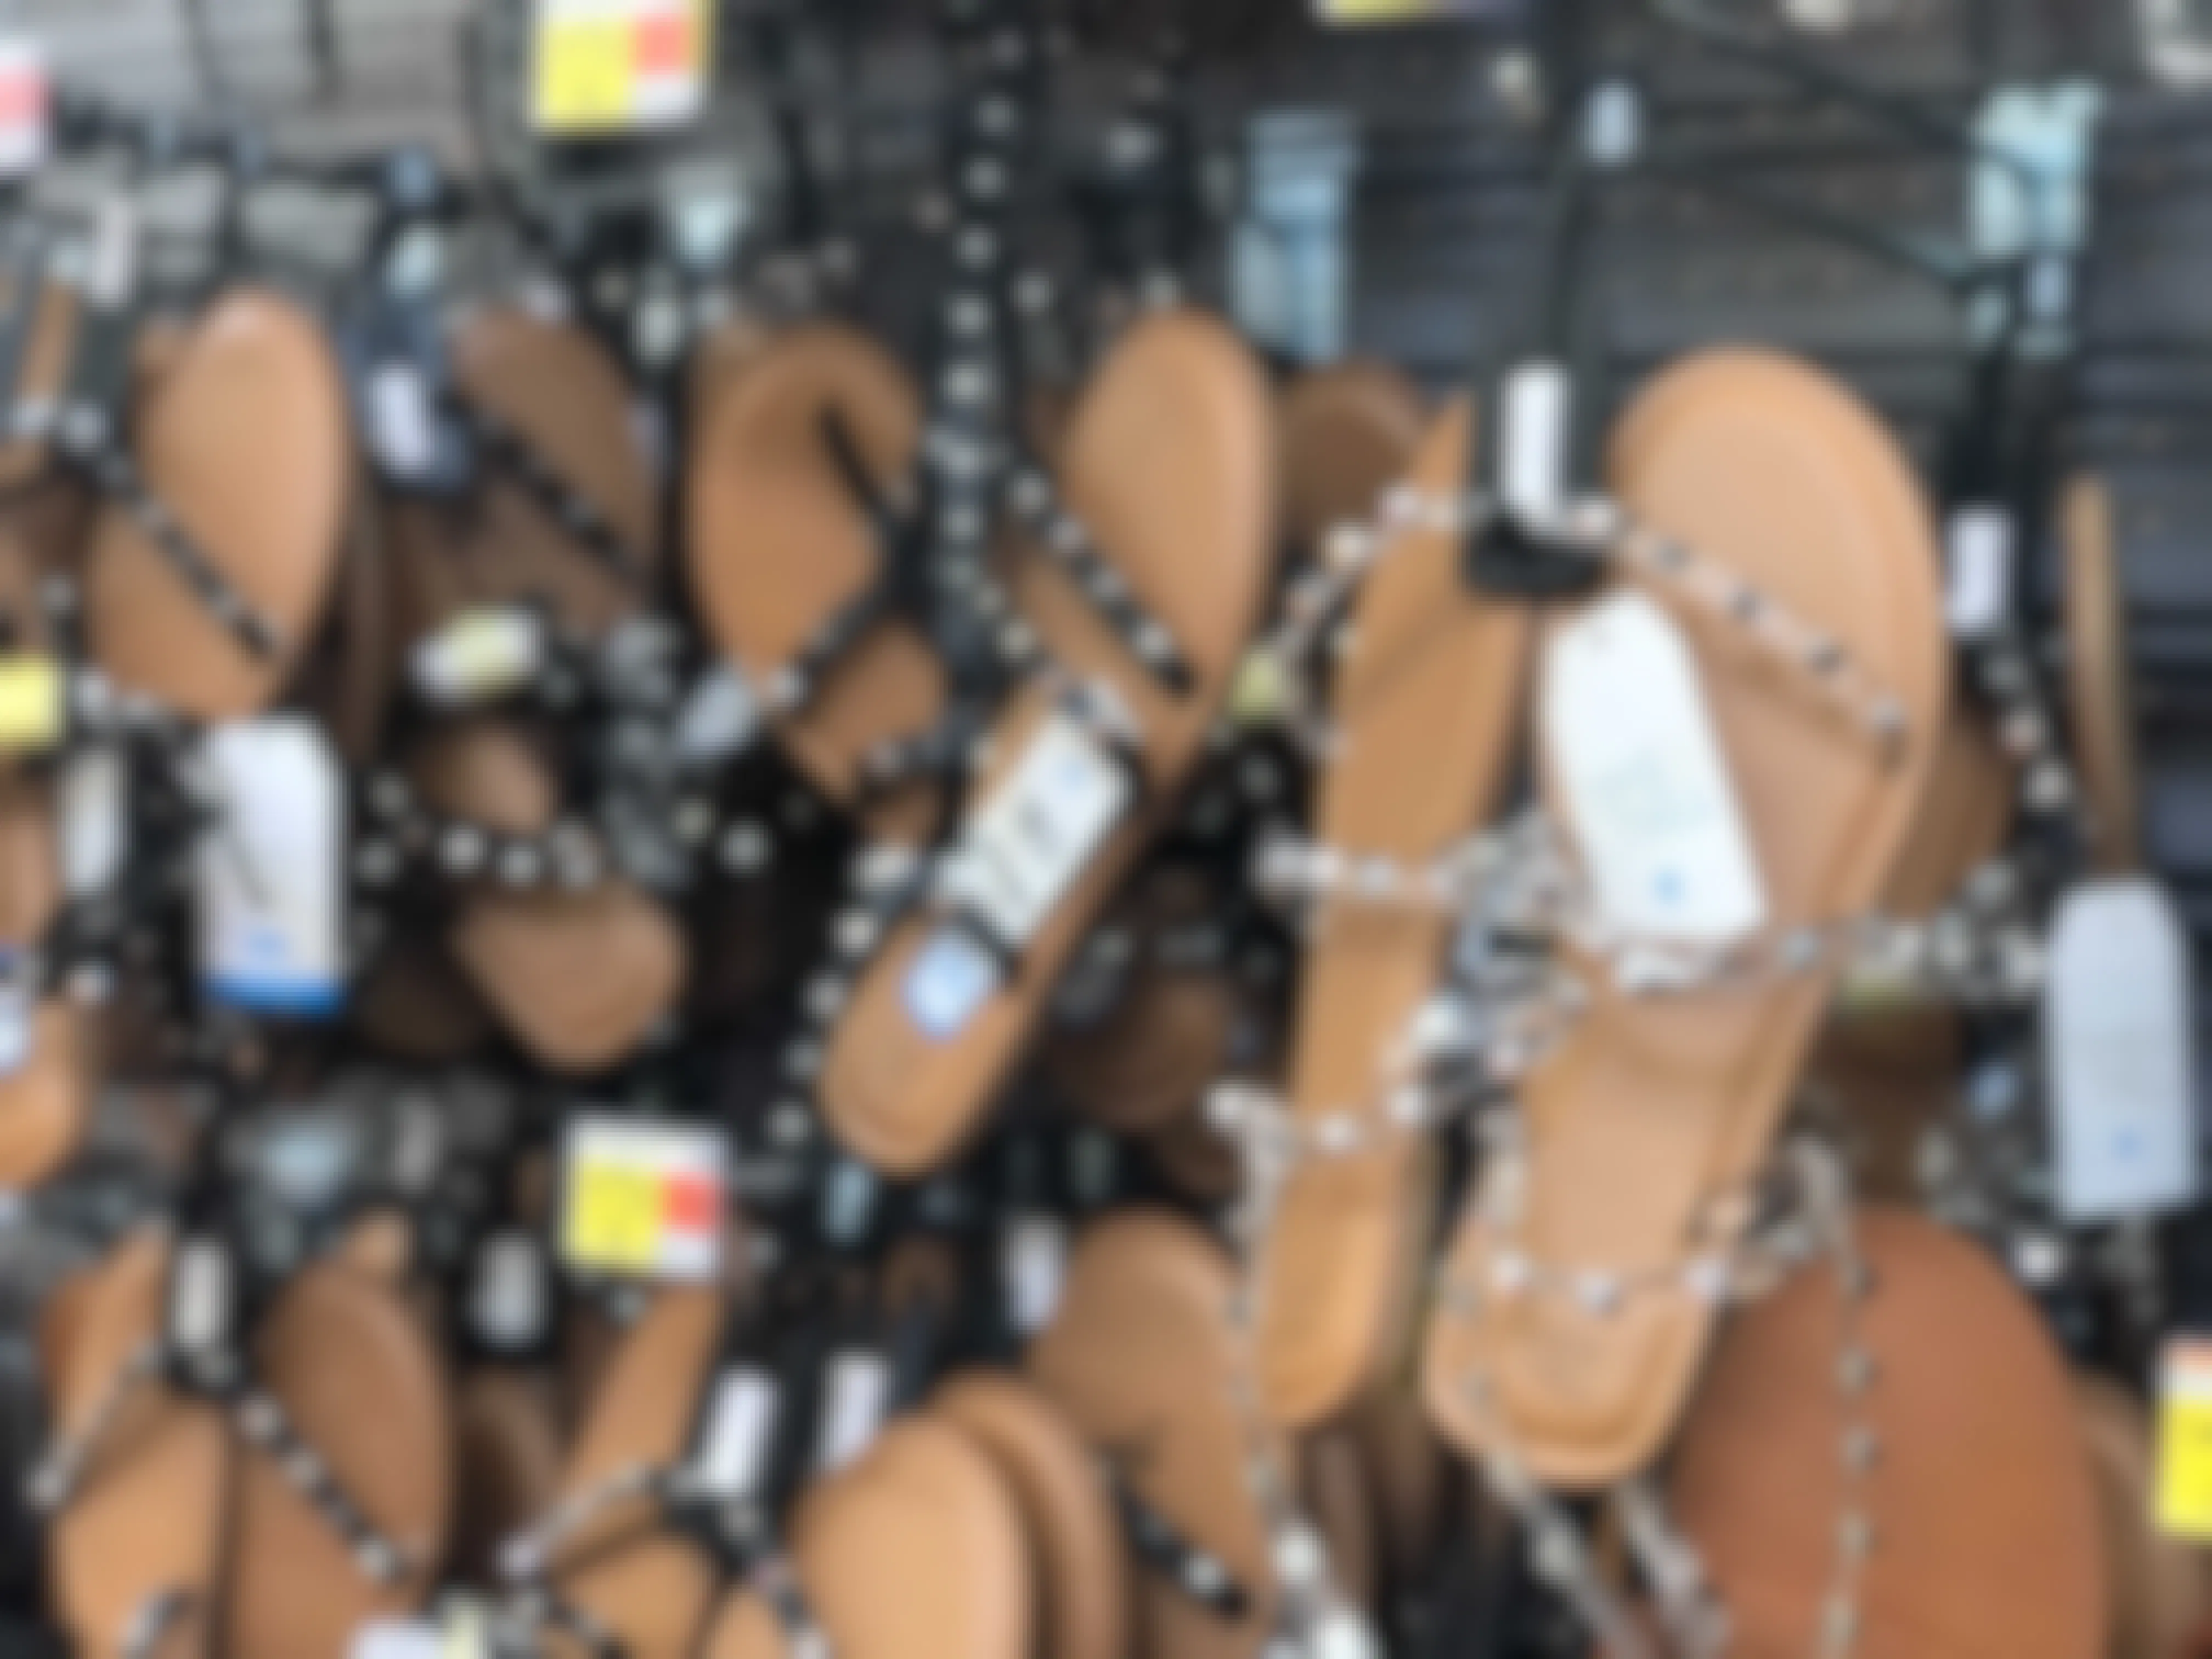 Several pairs of sandals hanging from store racks.